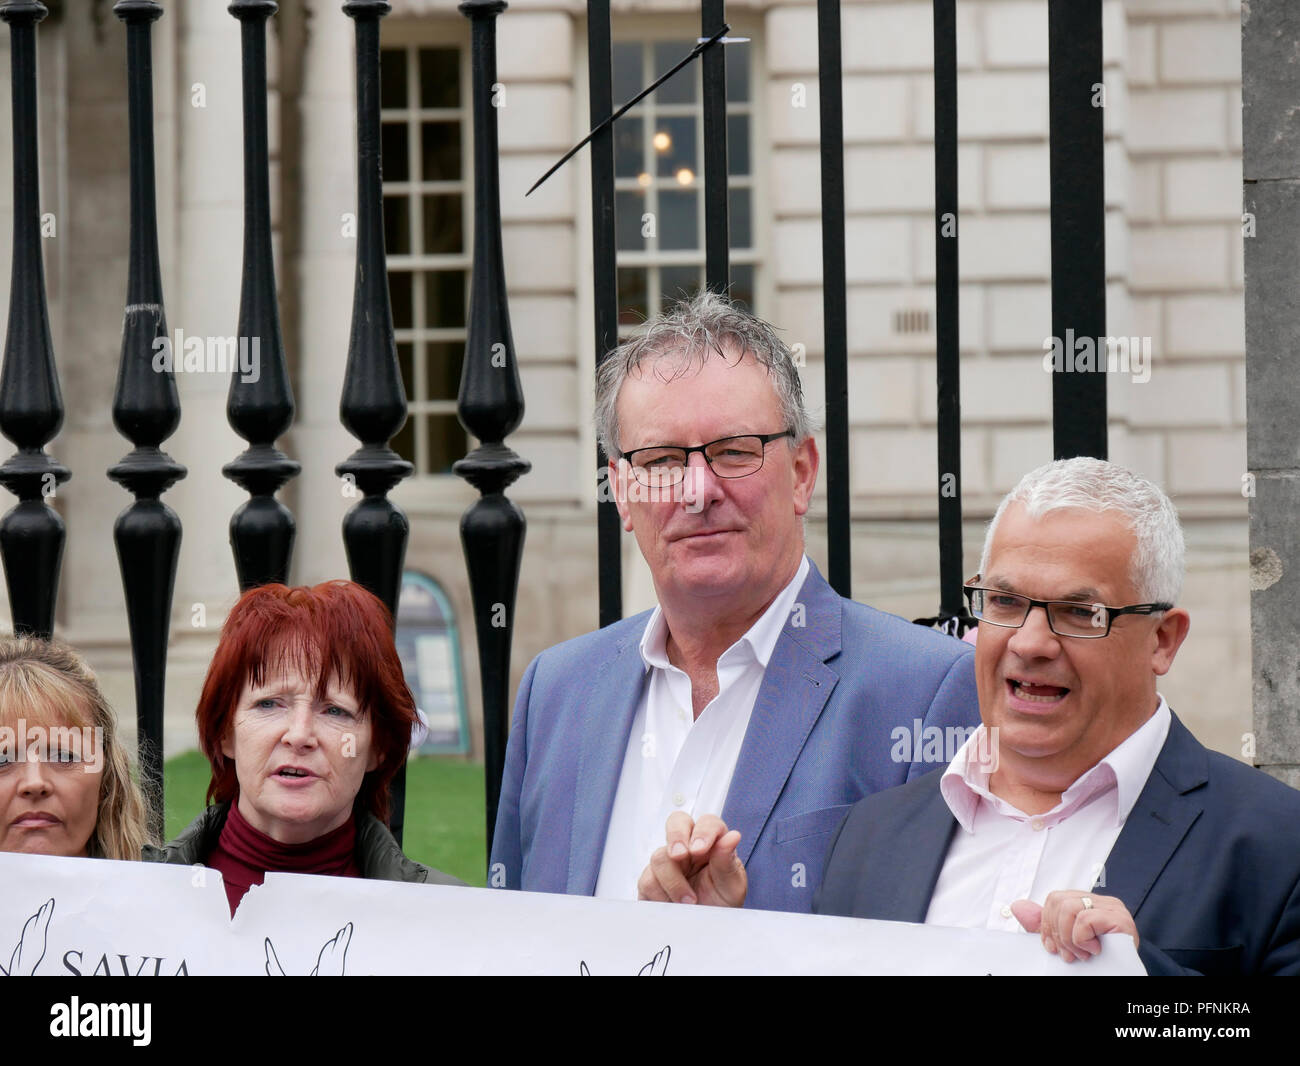 Belfast, Northern Ireland, UK. 22 August 2018. Survivors and Victims of Clerical and Institutional Abuse (SAVIA) held a protest at Belfast City Hall calling for an apology from the Vatican for historical child abuse. The group was joined by other victims and survivors. Pope Francis will visit Ireland over 25th and 26th August but will not visit Northern Ireland. Mike Nesbitt MLA with protesters. Credit J Orr/Alamy Live News Stock Photo